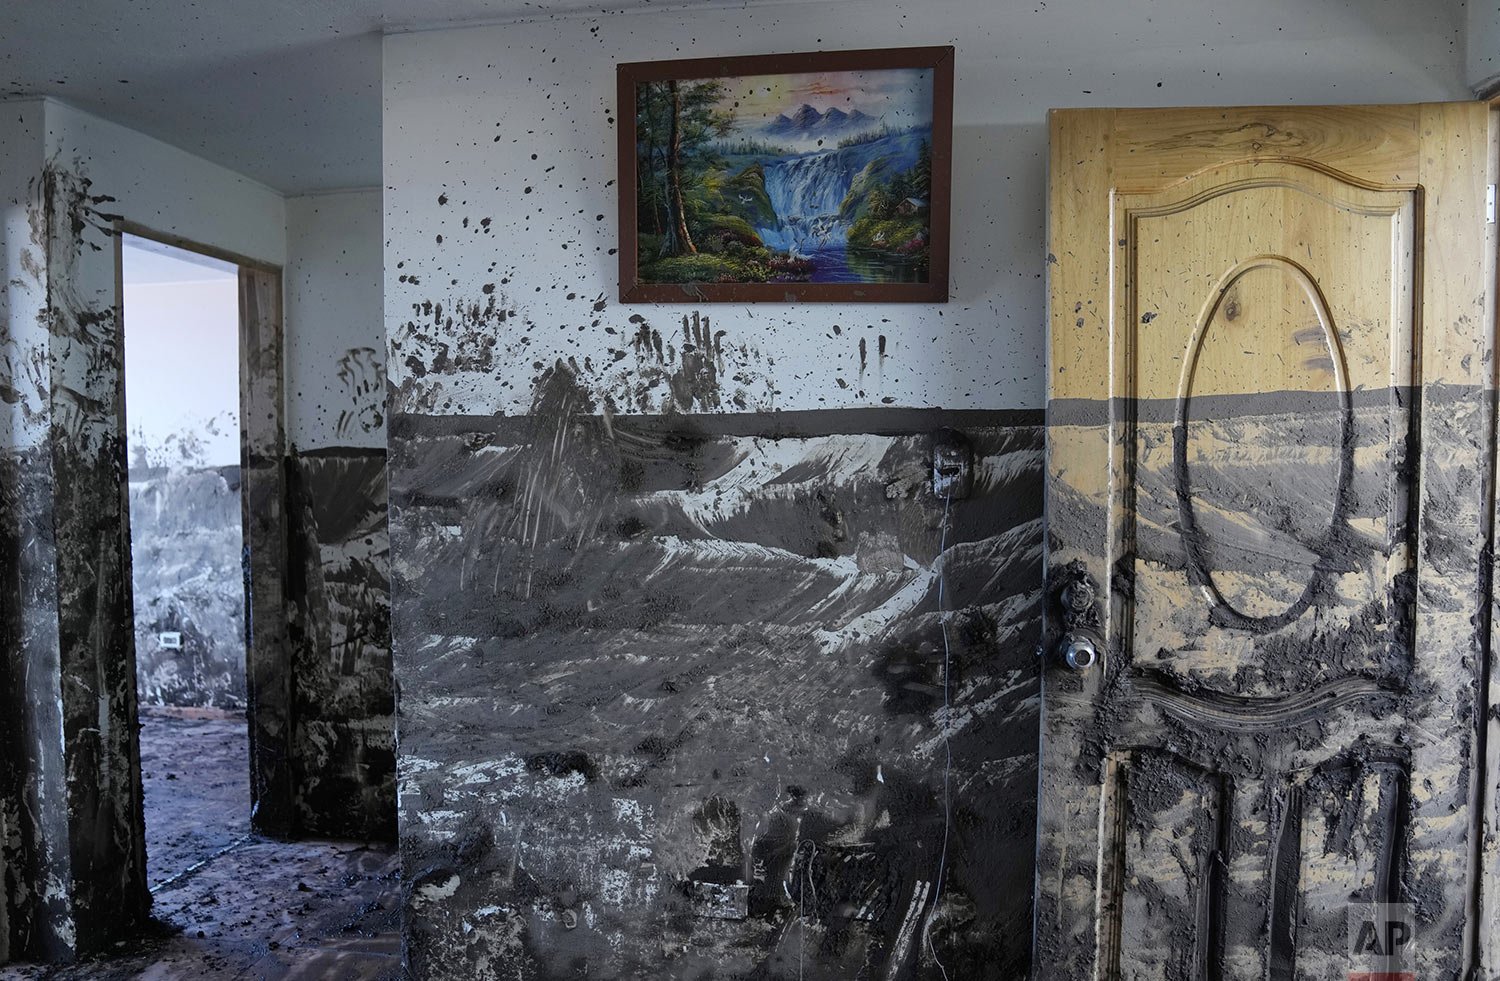  A line on a wall marks the level at which mud reached inside a home a day after a rain-weakened hillside collapsed and brought waves of mud over homes and a sports field in the La Gasca neighborhood of Quito, Ecuador, Feb. 2, 2022. (AP Photo/Dolores